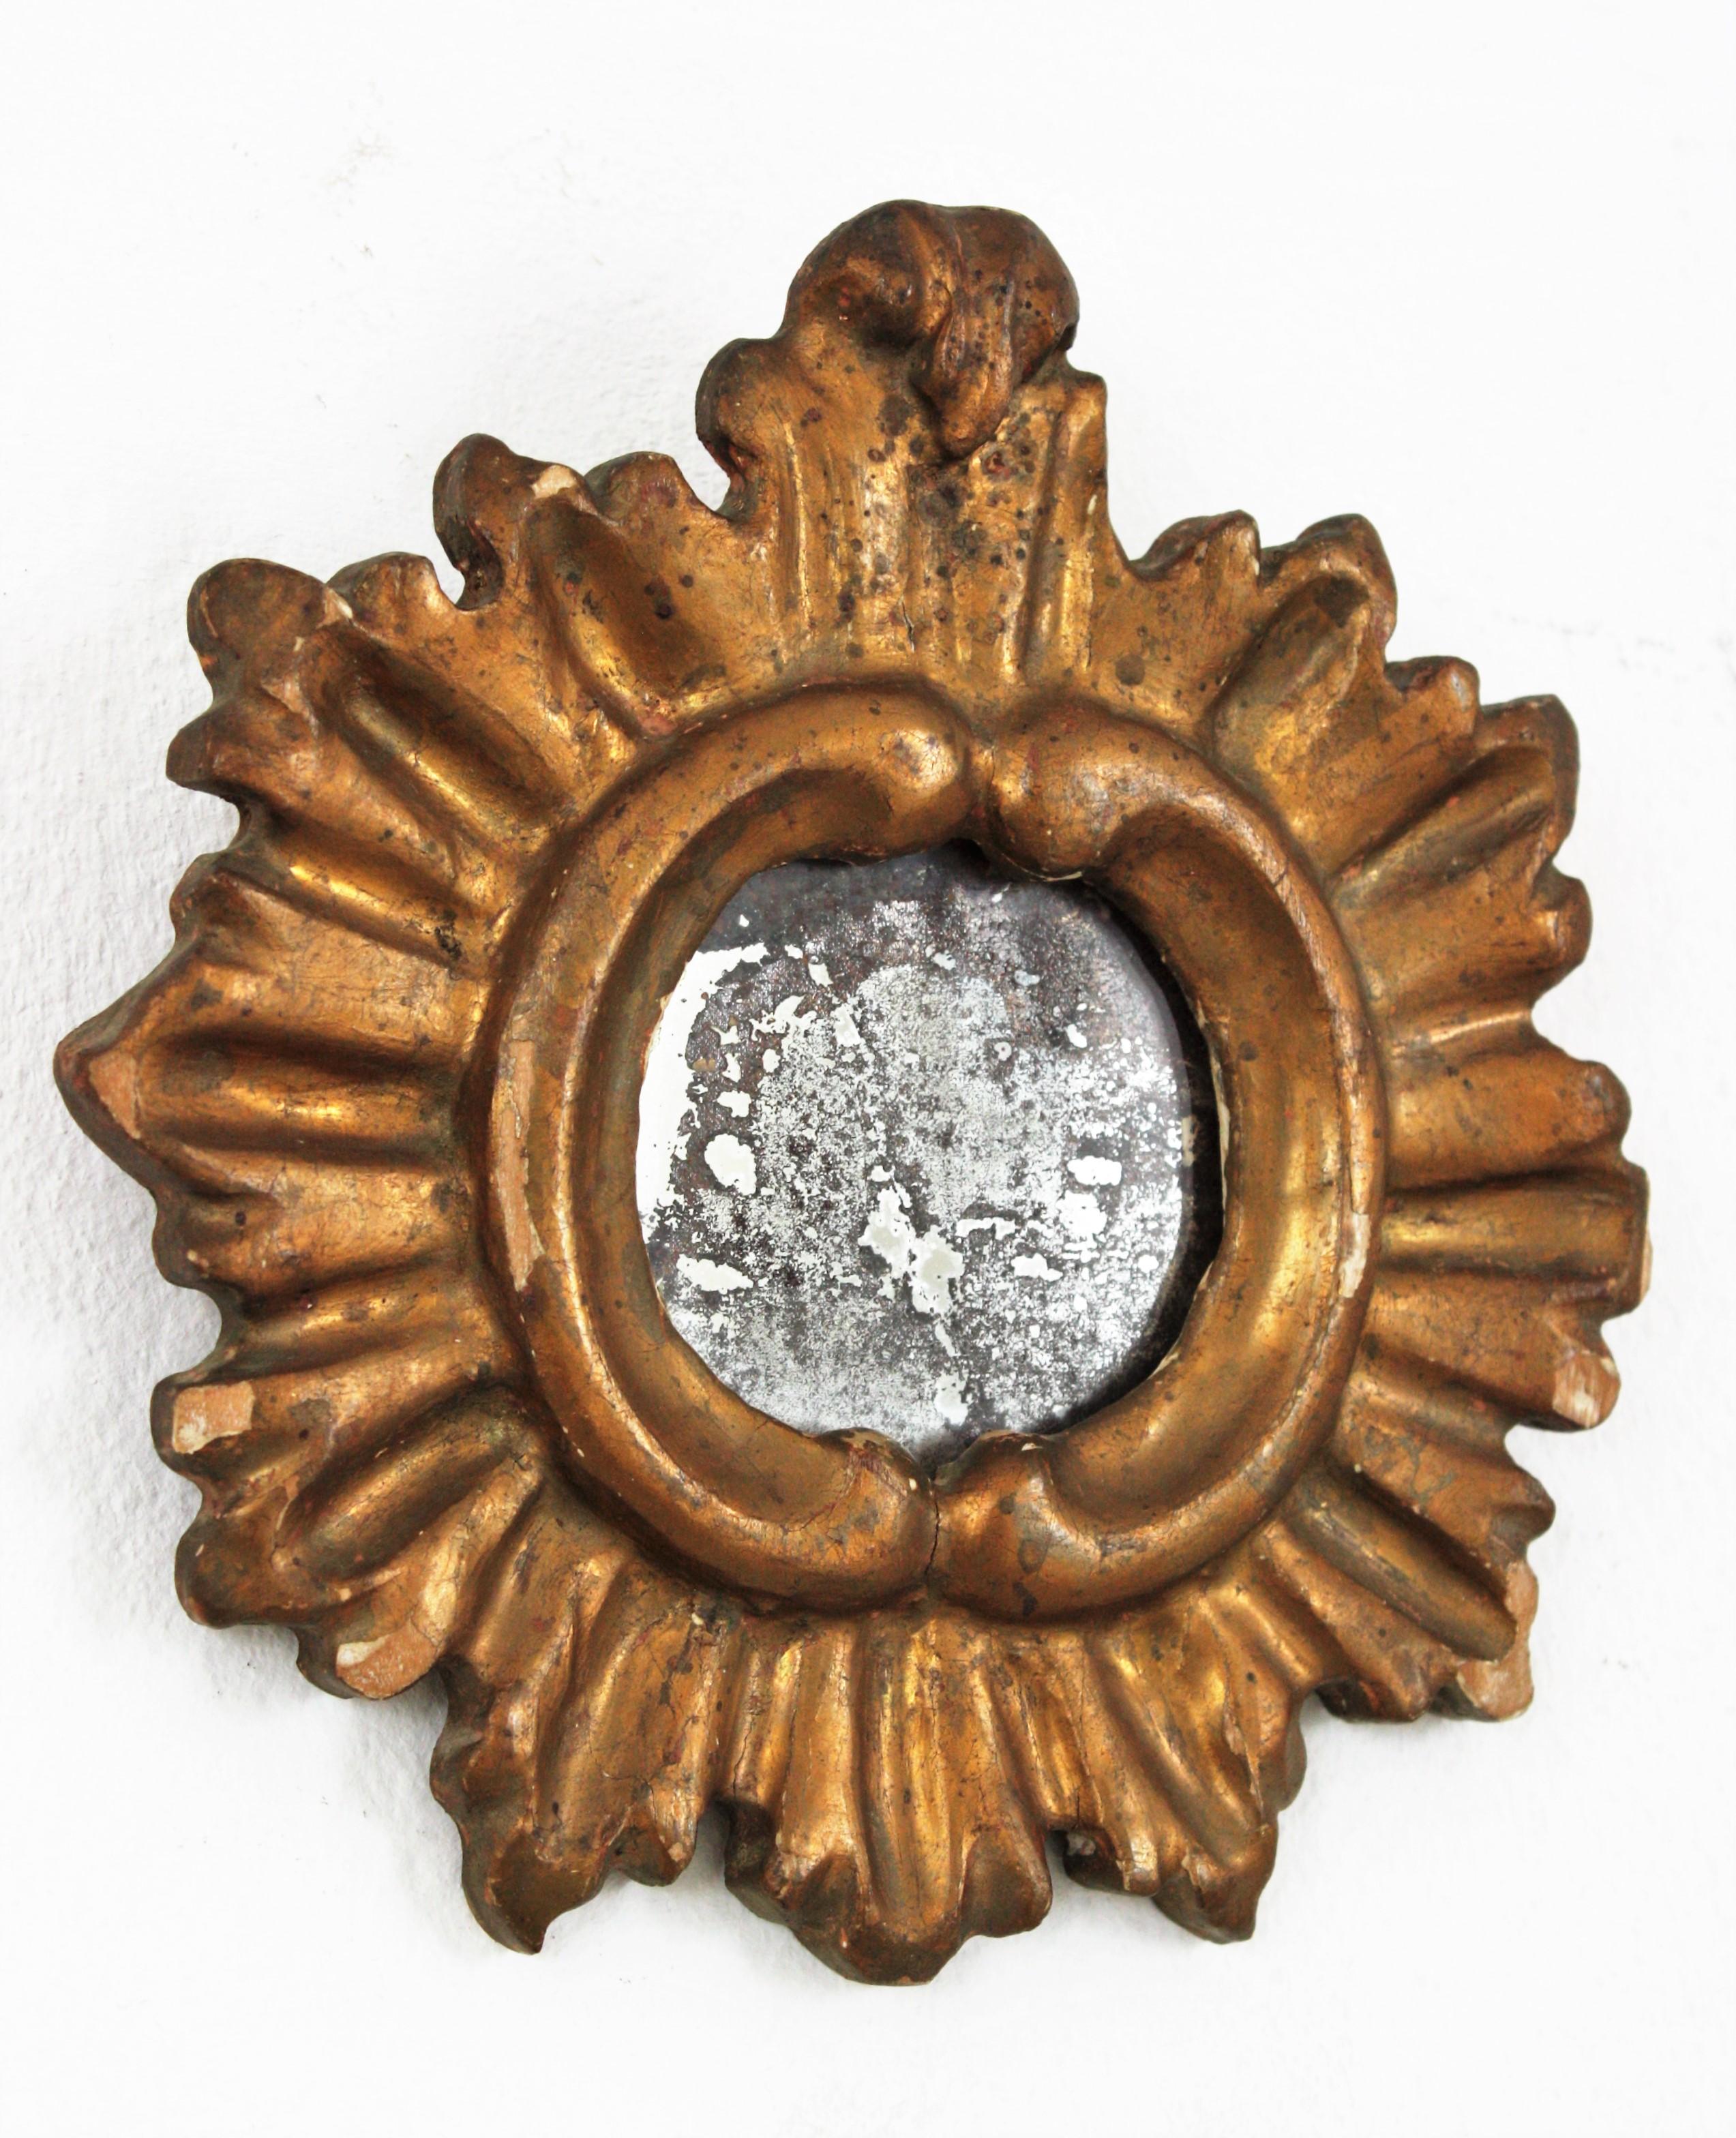 Antique Spanish Baroque carved giltwood sunburst mirror with crest. Spain, 19th century.
This lovely collection mirror has a carved frame covered with gesso and gold leaf finishing. It has a terrific aged patina and the original antique